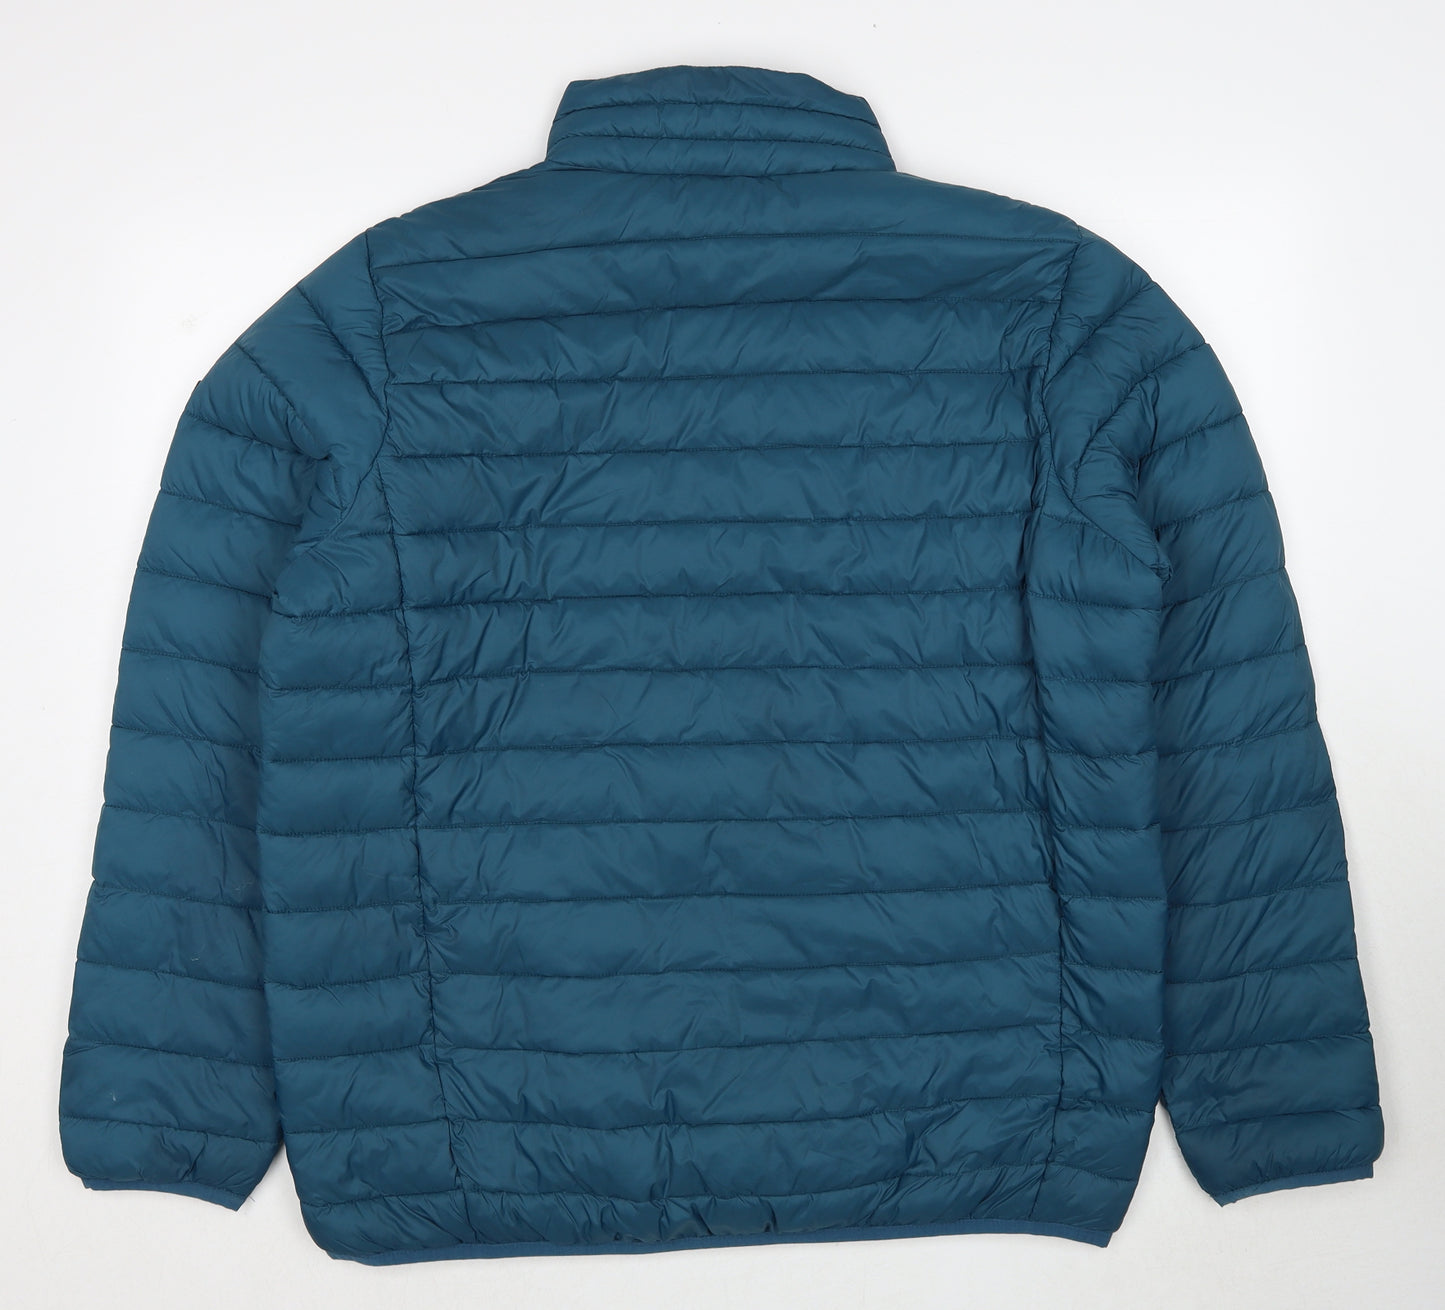 TOG24 Mens Blue Quilted Jacket Size XL Zip